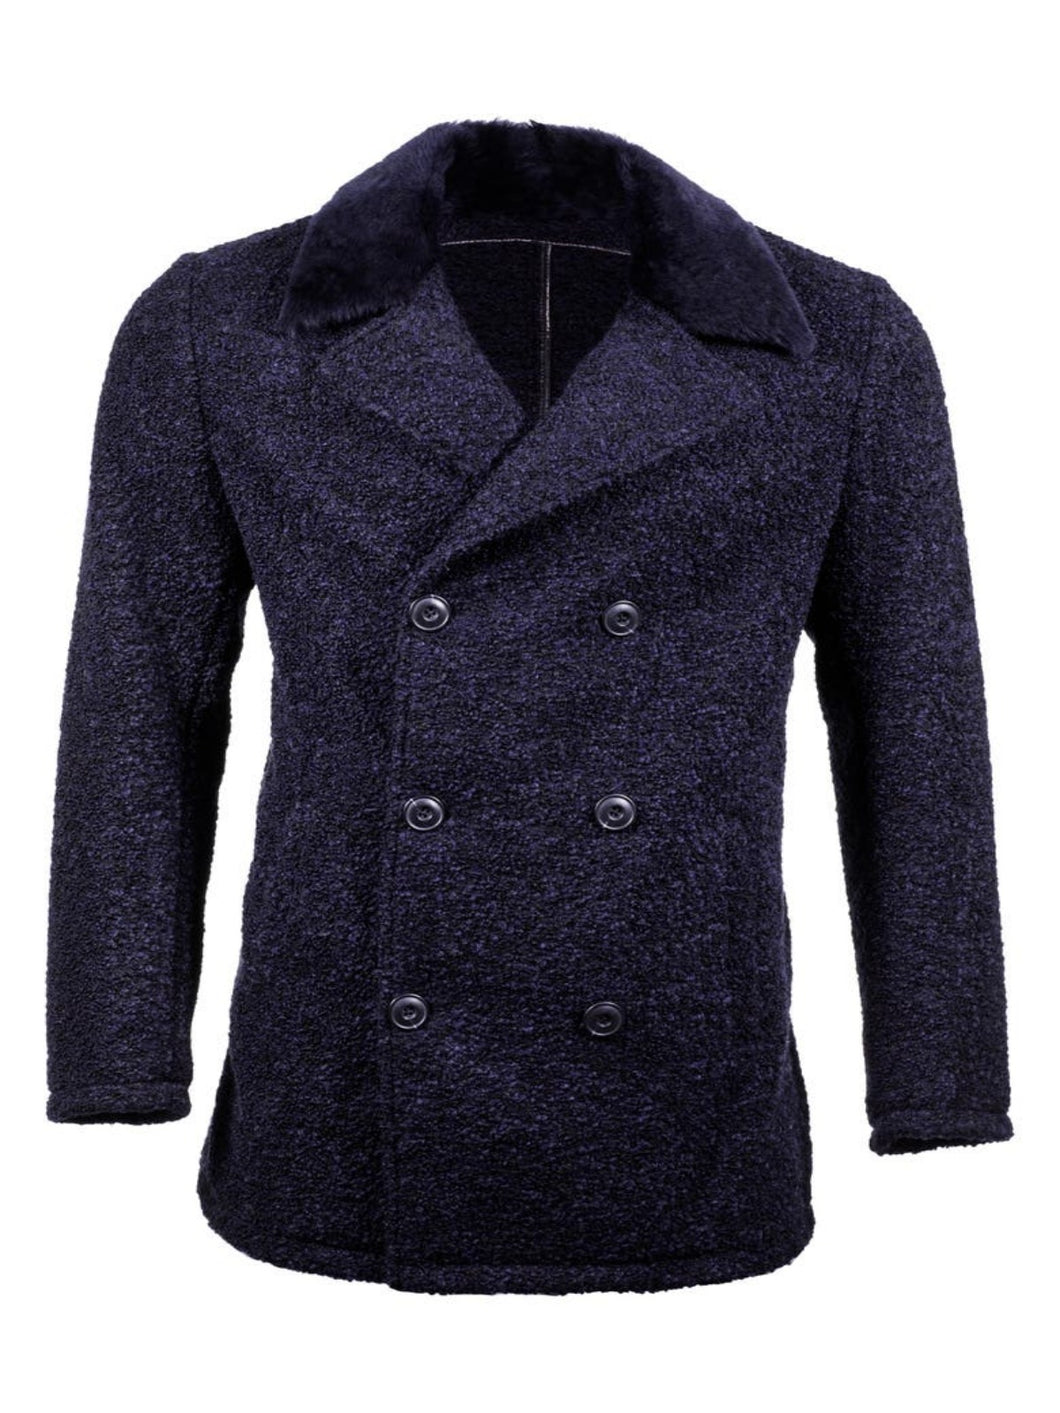 Mens Double Breasted Wool Jacket